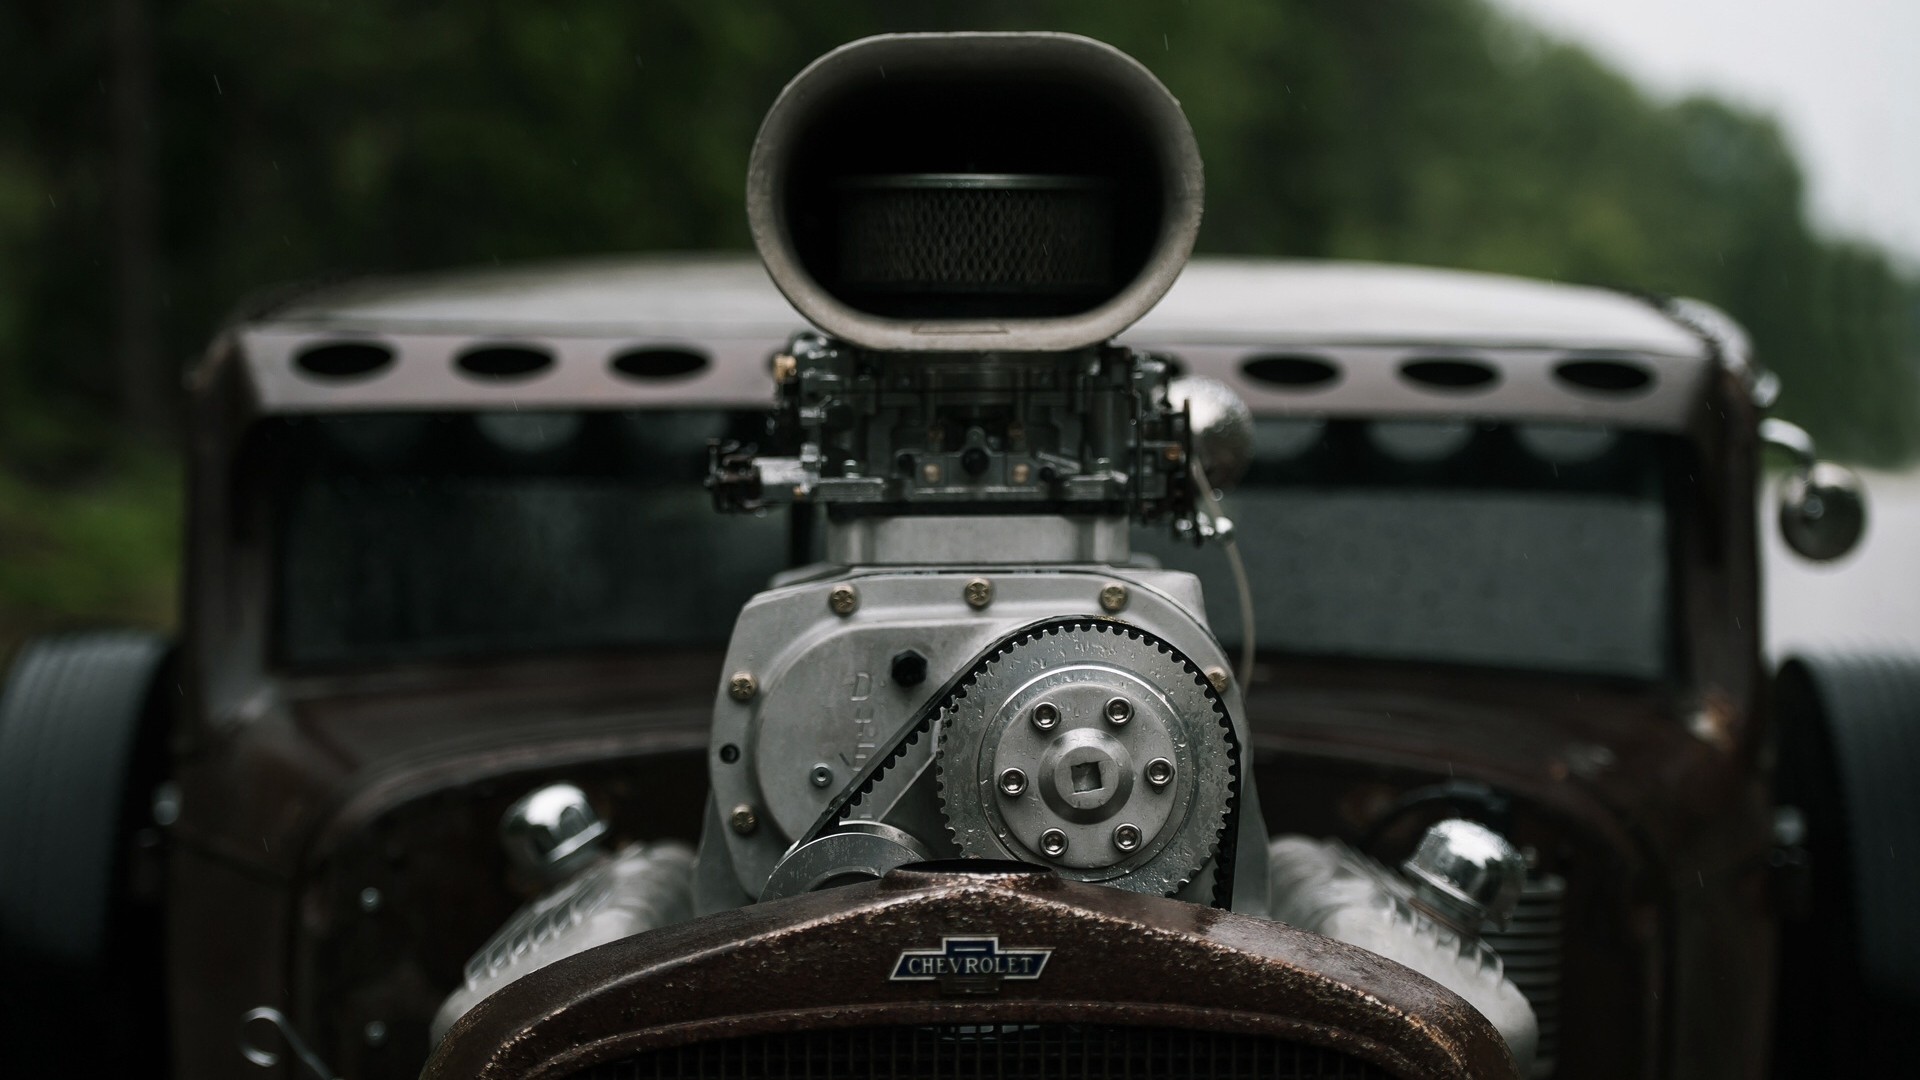 vehicle, Old Car, Oldtimers, Chevrolet, Engines, Gears, Closeup, Hot Rod, Wheels, Depth Of Field Wallpaper